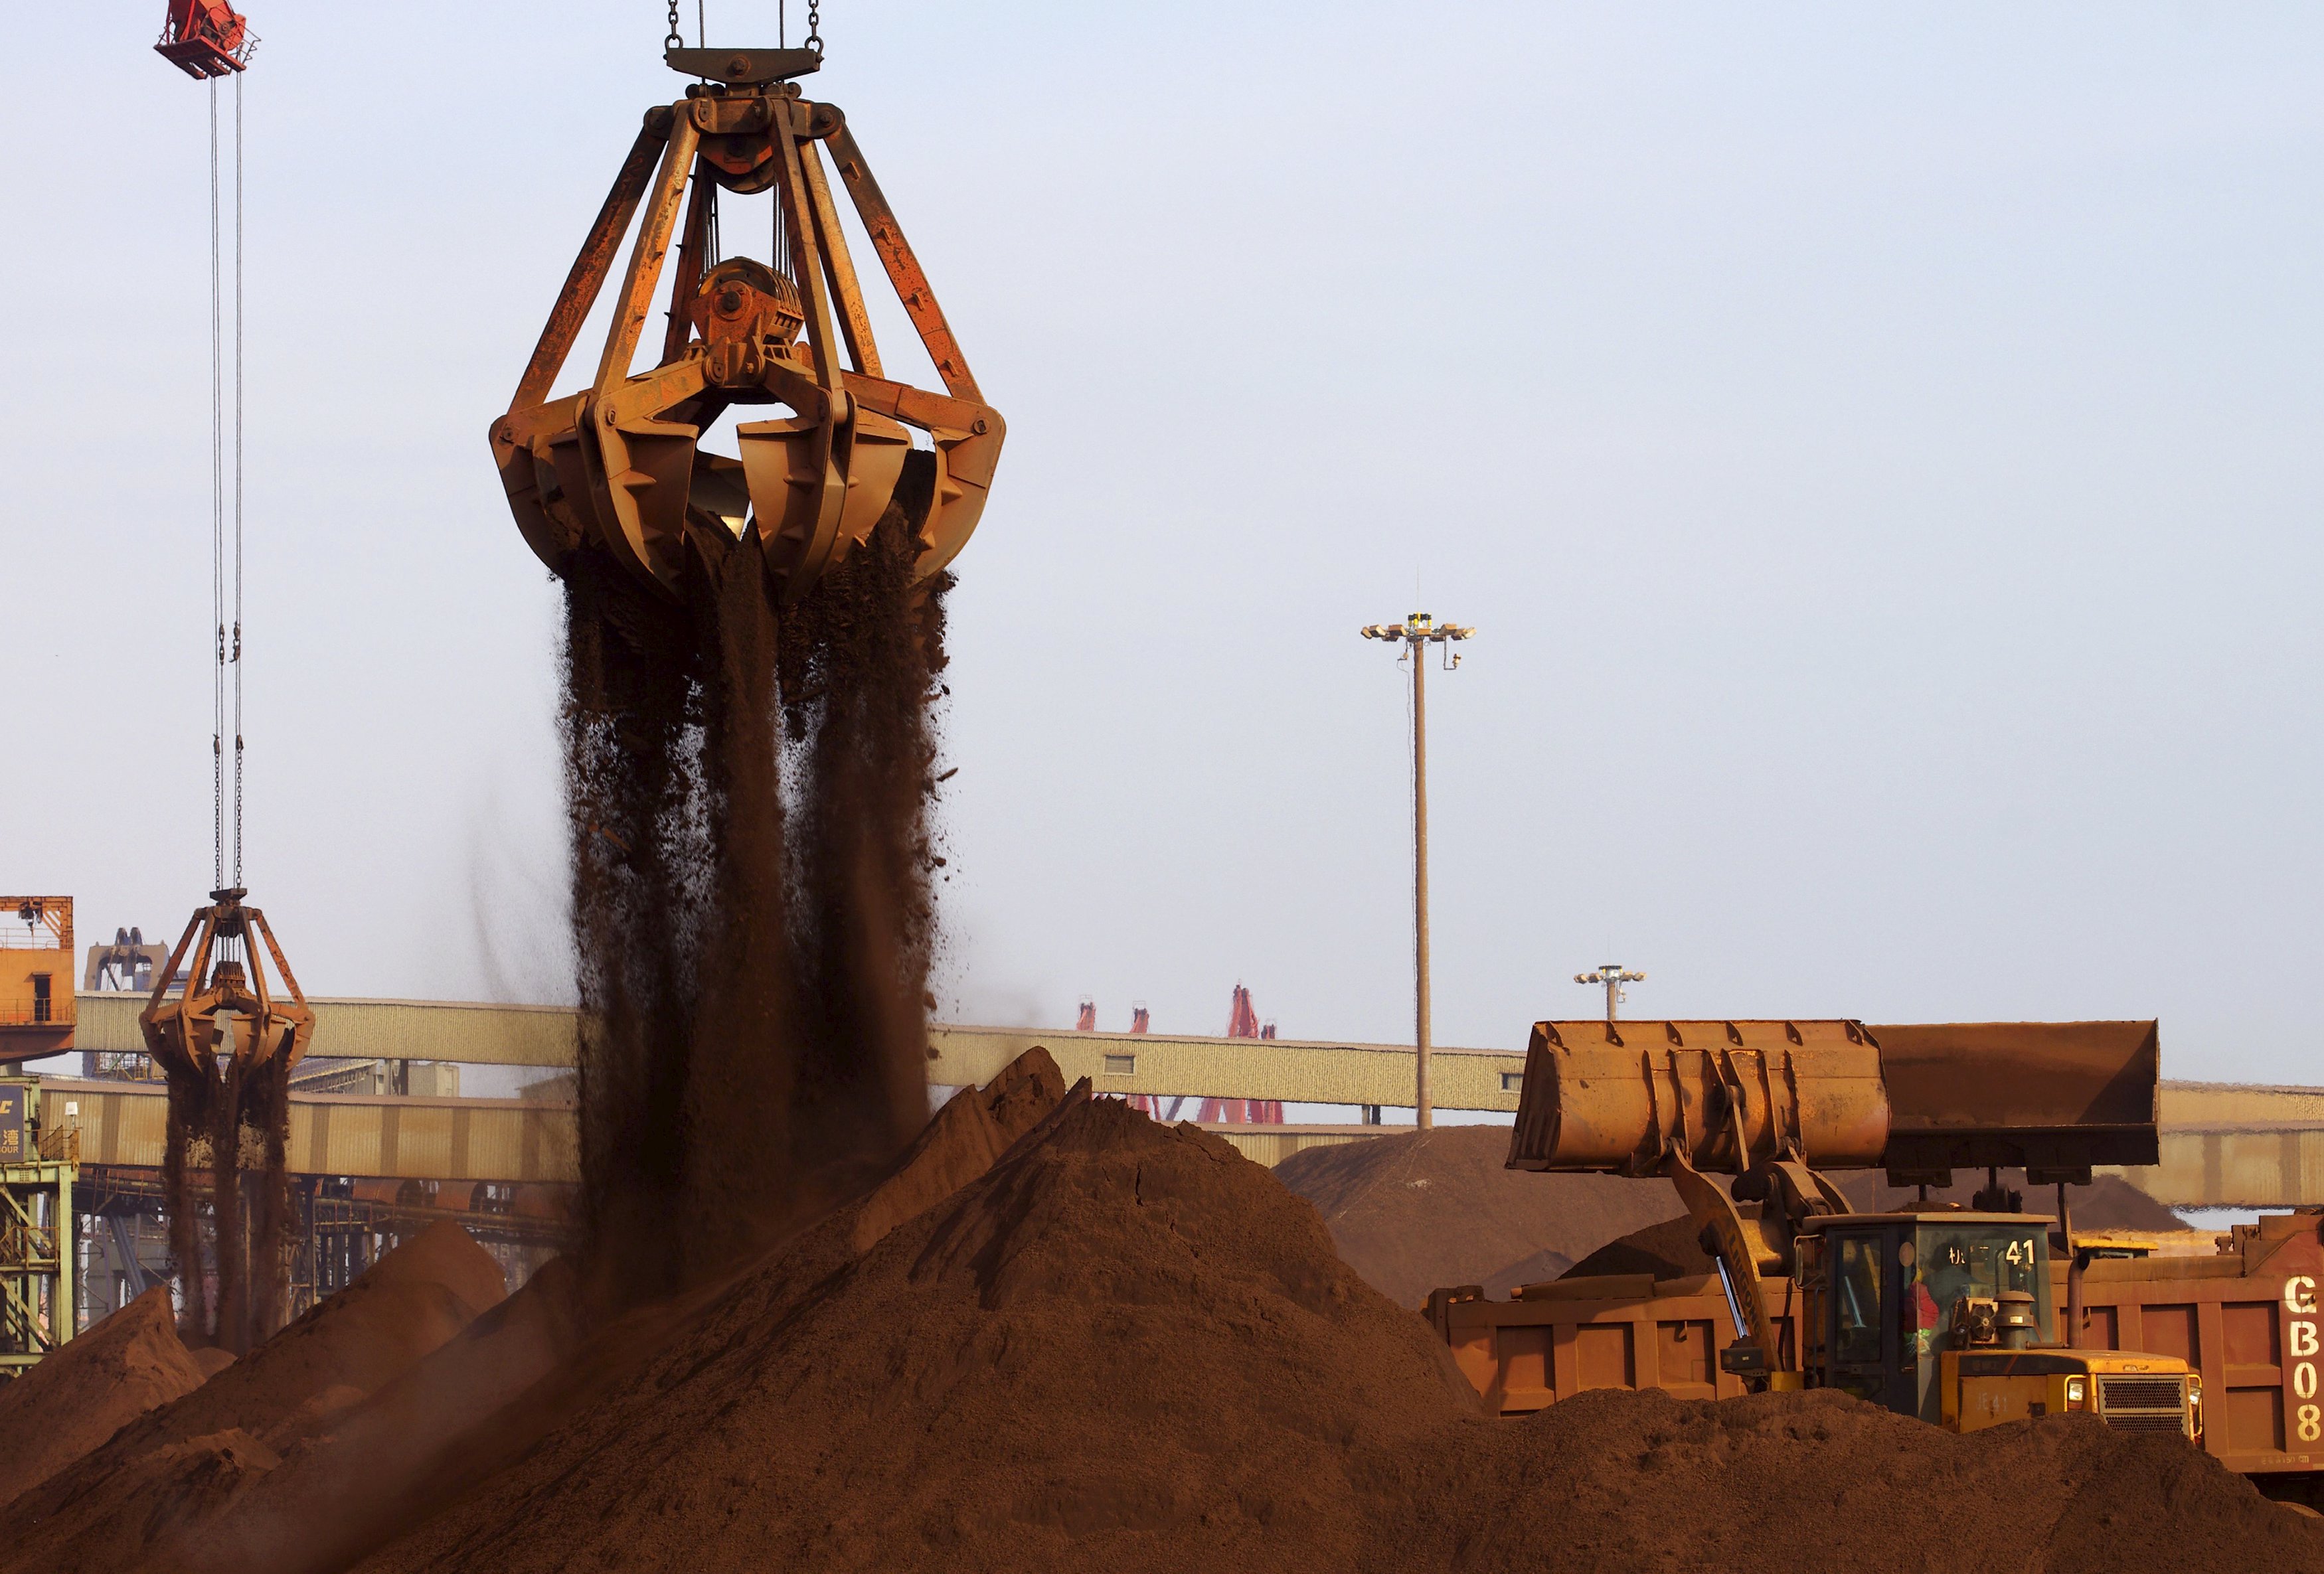 Cranes unload imported iron ore from a ship at a port in Rizhao, Shandong province, China, in this December 6, 2015 file photo. China said on December 9, 2015 it would cut some import and export taxes next year to boost its ailing trade sector, raising concerns that cheaper Chinese products could exacerbate a global oversupply of basic materials such as steel and chemicals. REUTERS/Stringer/Files CHINA OUT. NO COMMERCIAL OR EDITORIAL SALES IN CHINA